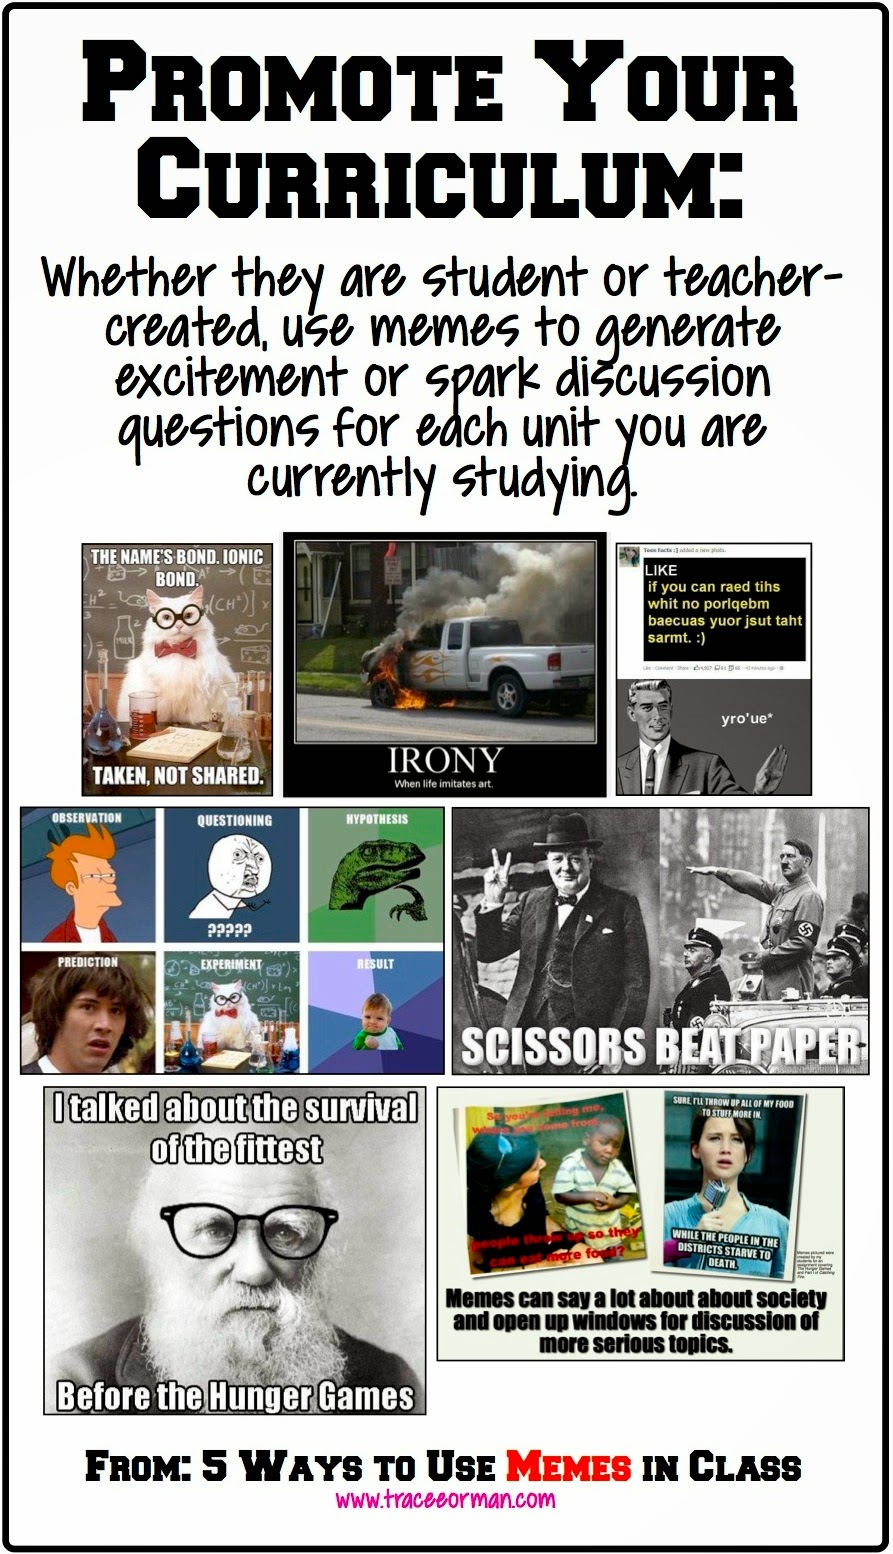 Promote your curriculum in your classroom using memes {from www.traceeorman.com}